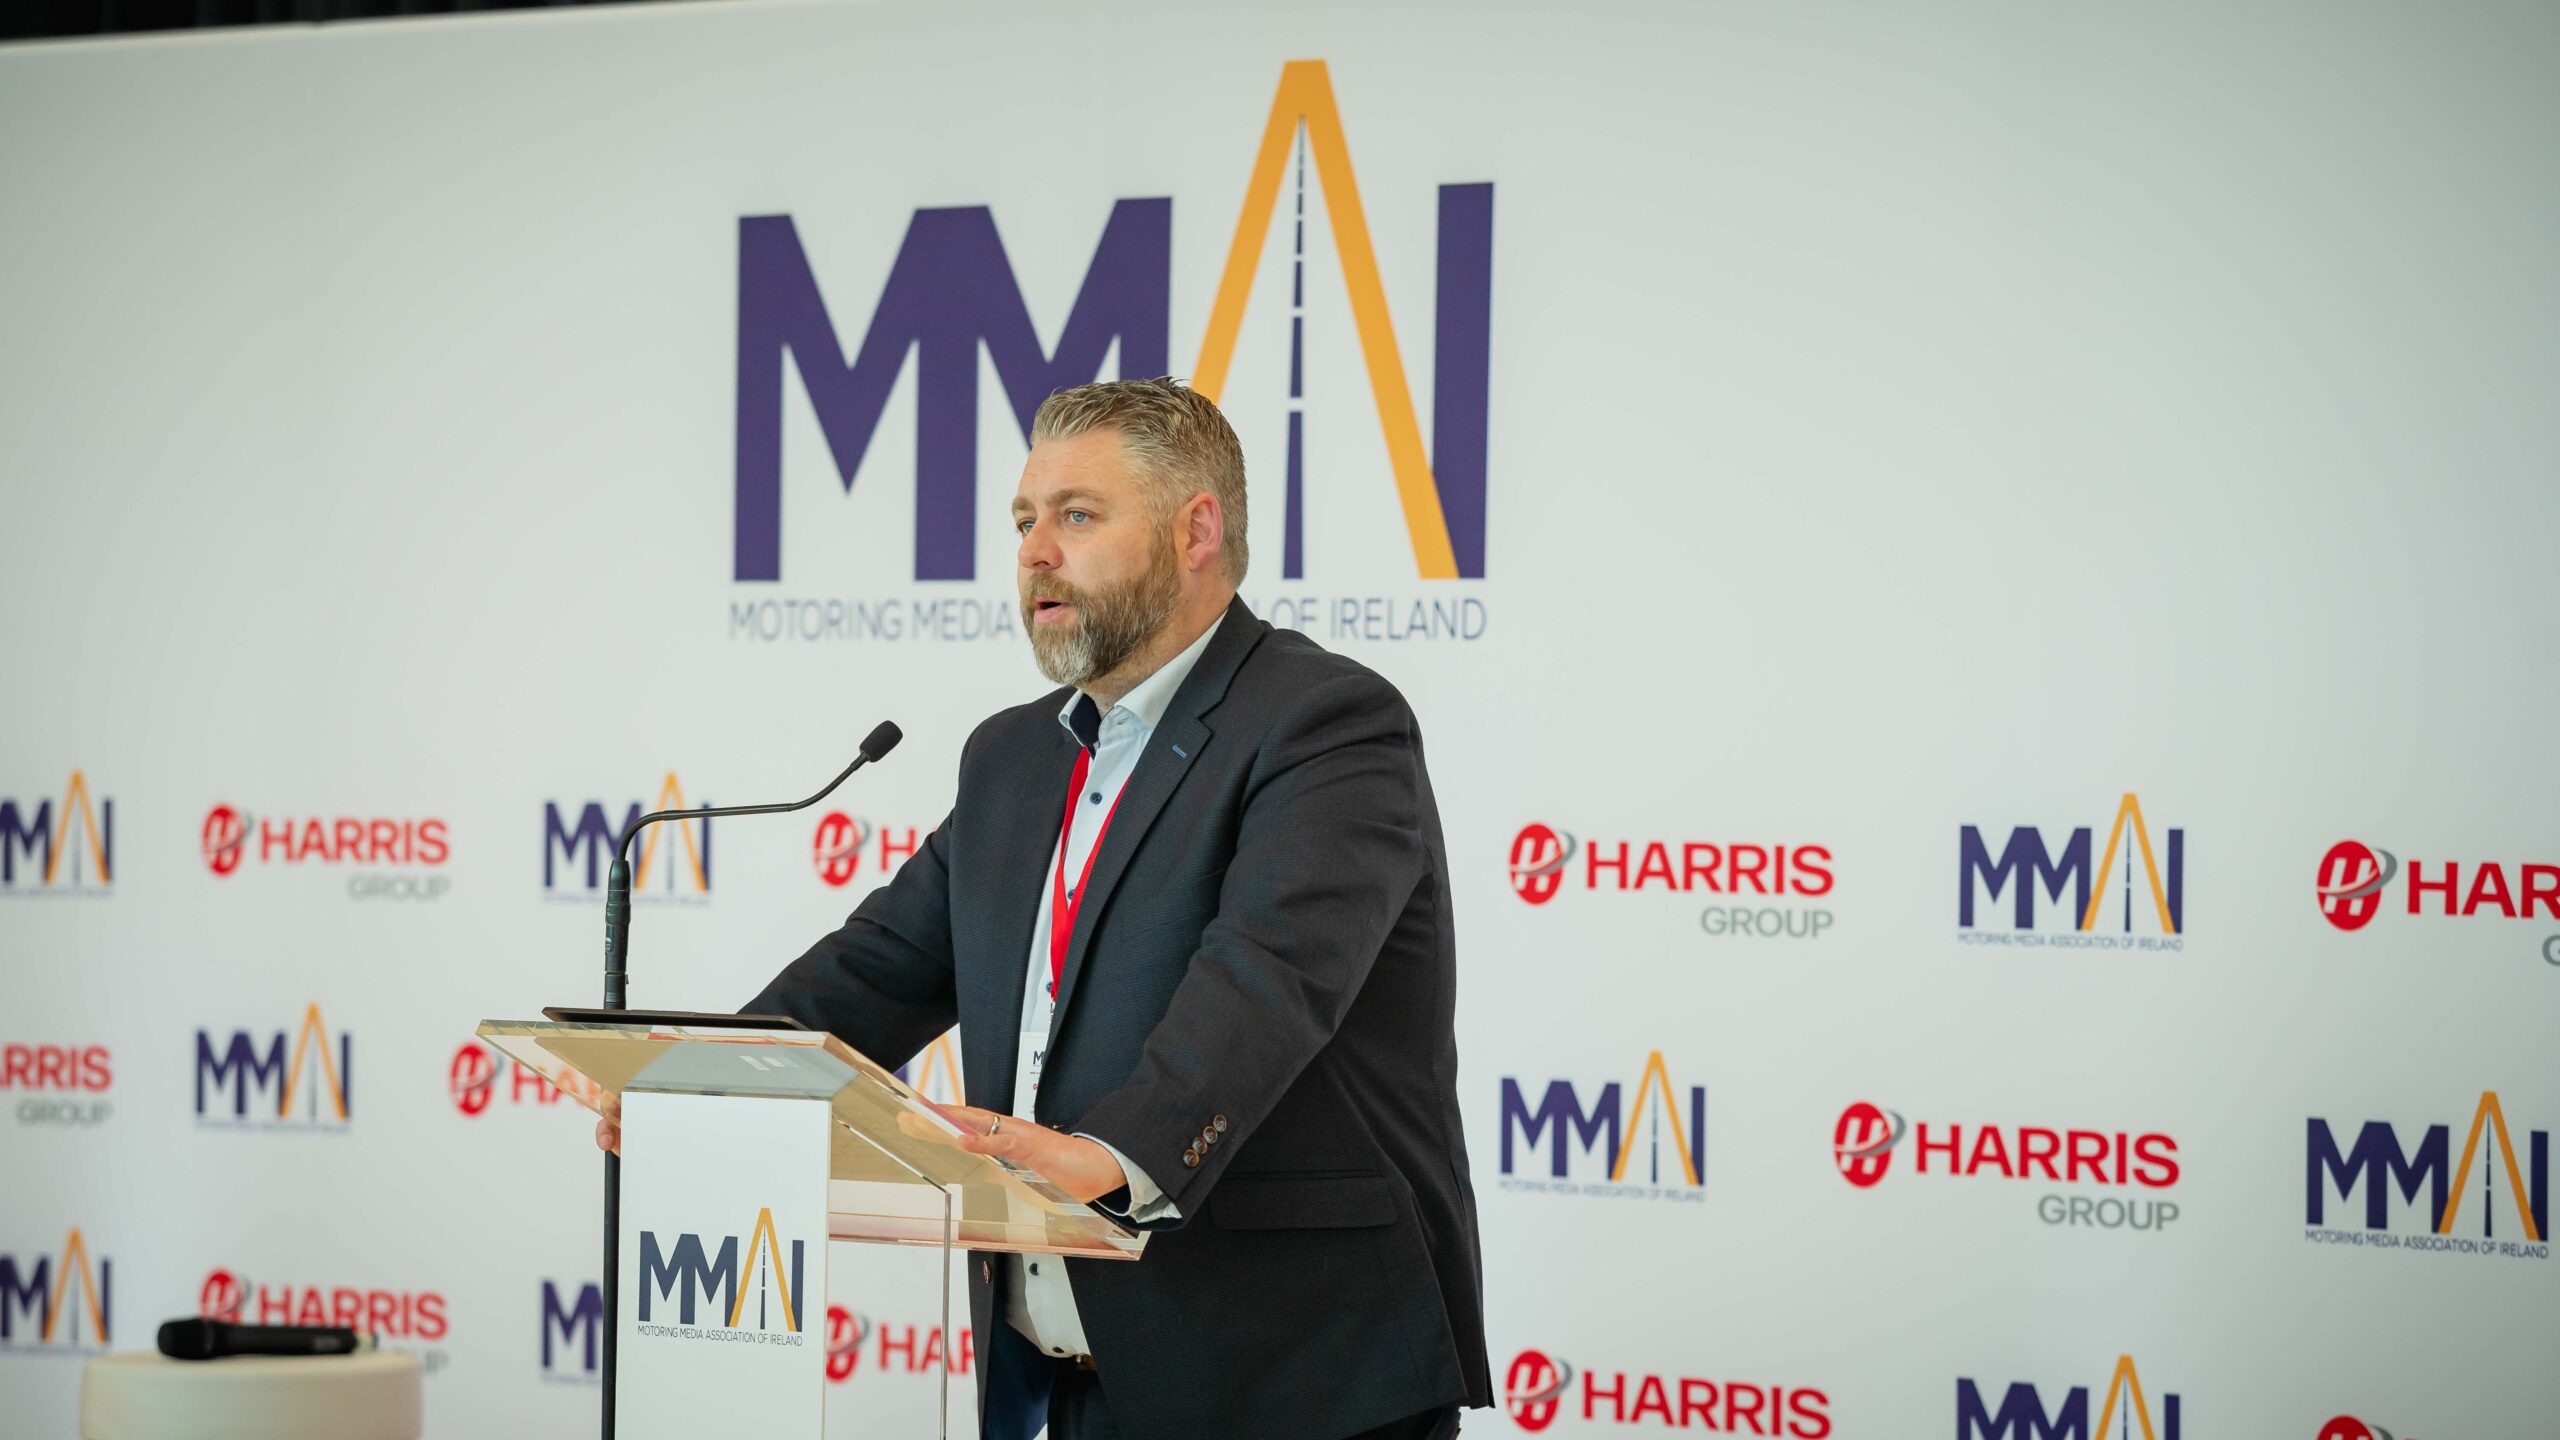 Inaugural MMAI Industry Breakfast Morning Takes Place in Dublin